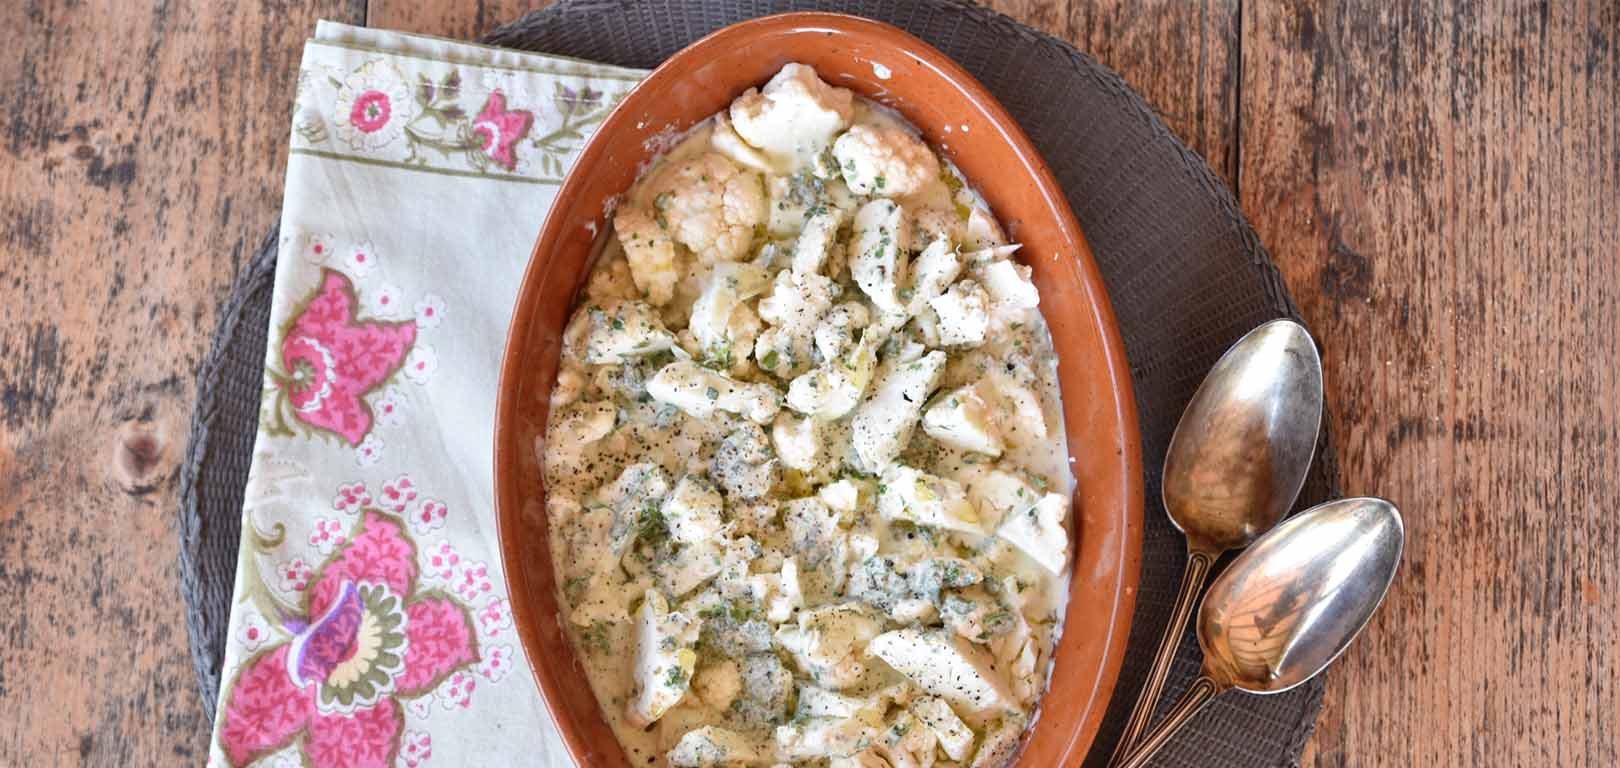 BAKED CAULIFLOWER WITH CAPER SAUCE